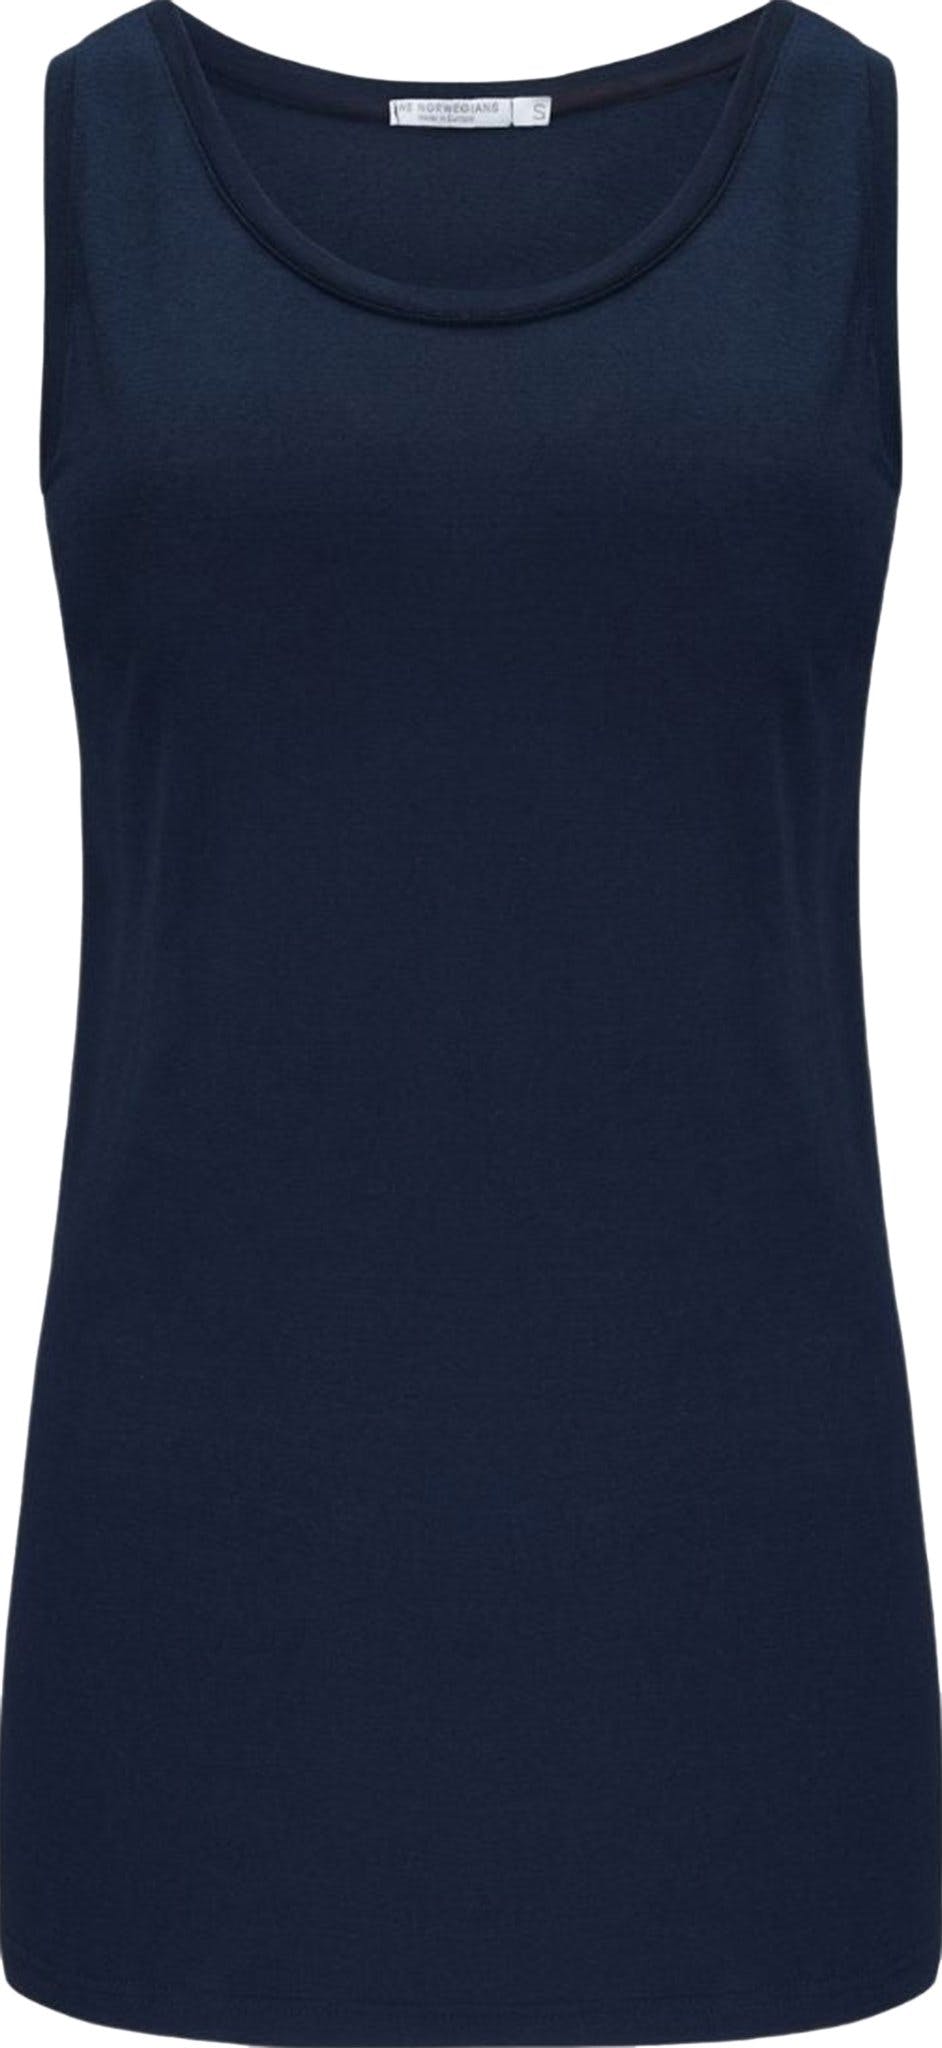 Product image for Skog Tank Top - Women's